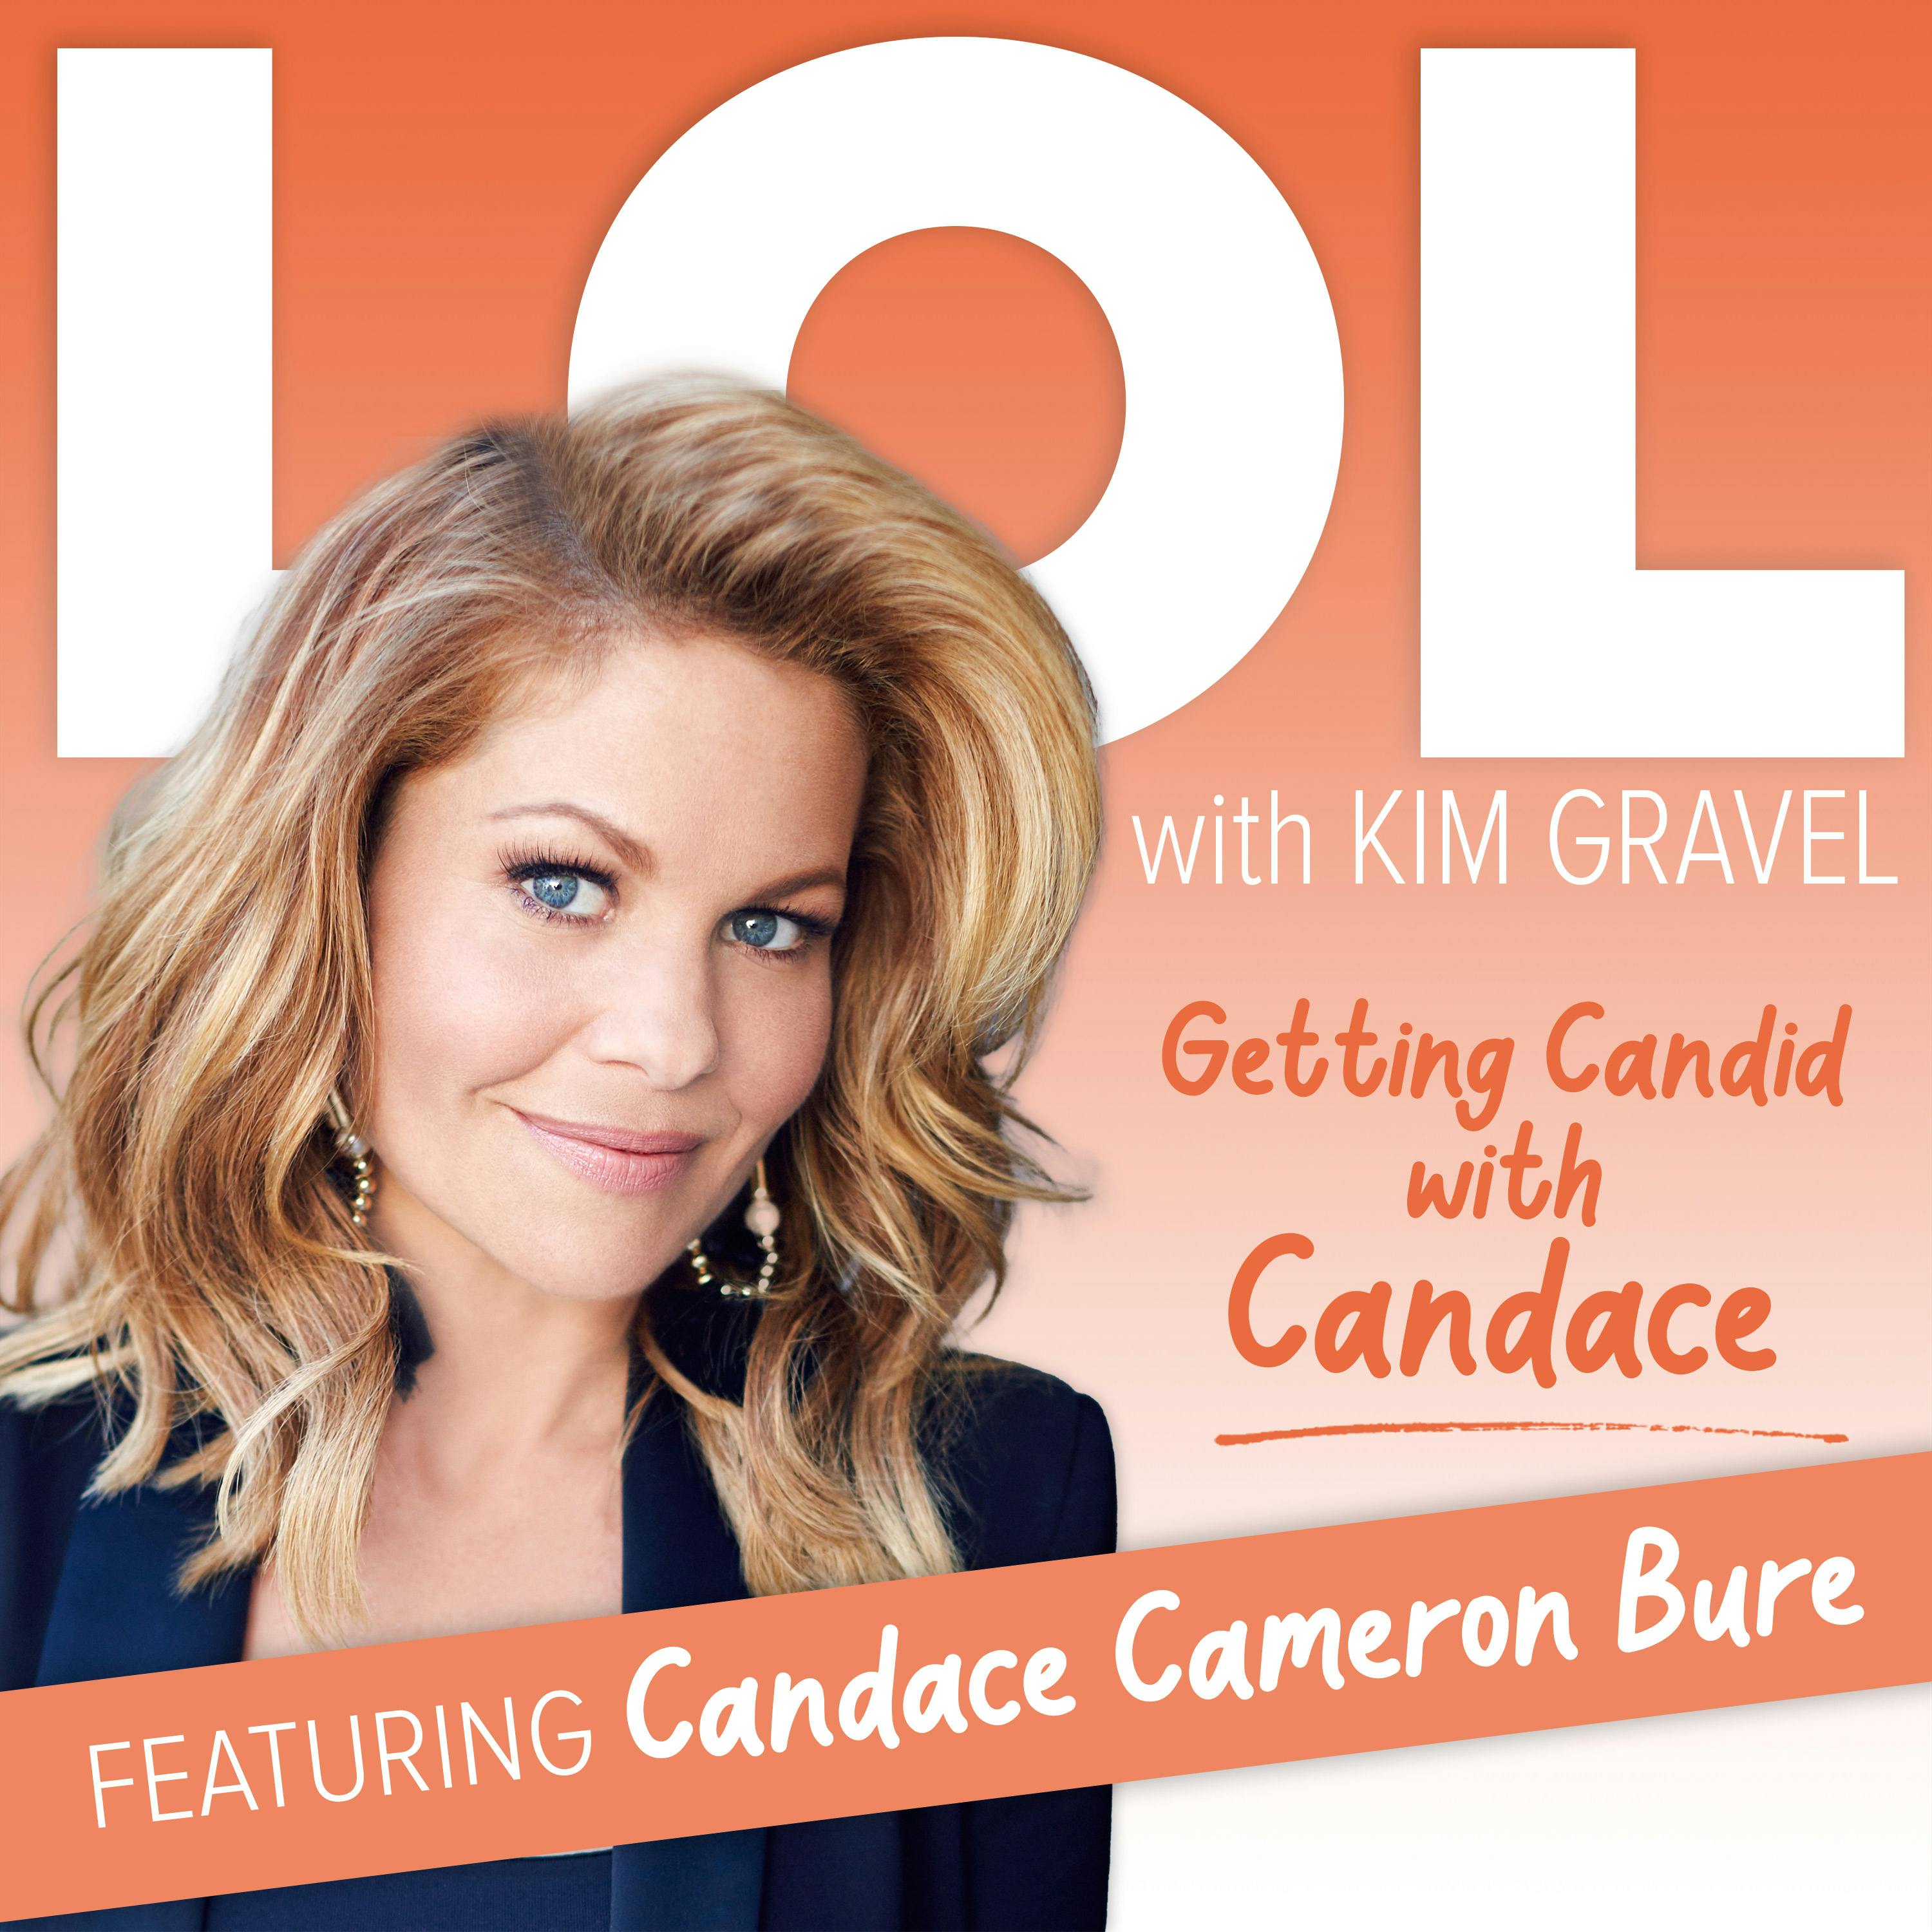 Getting Candid with Candace Cameron Bure Image